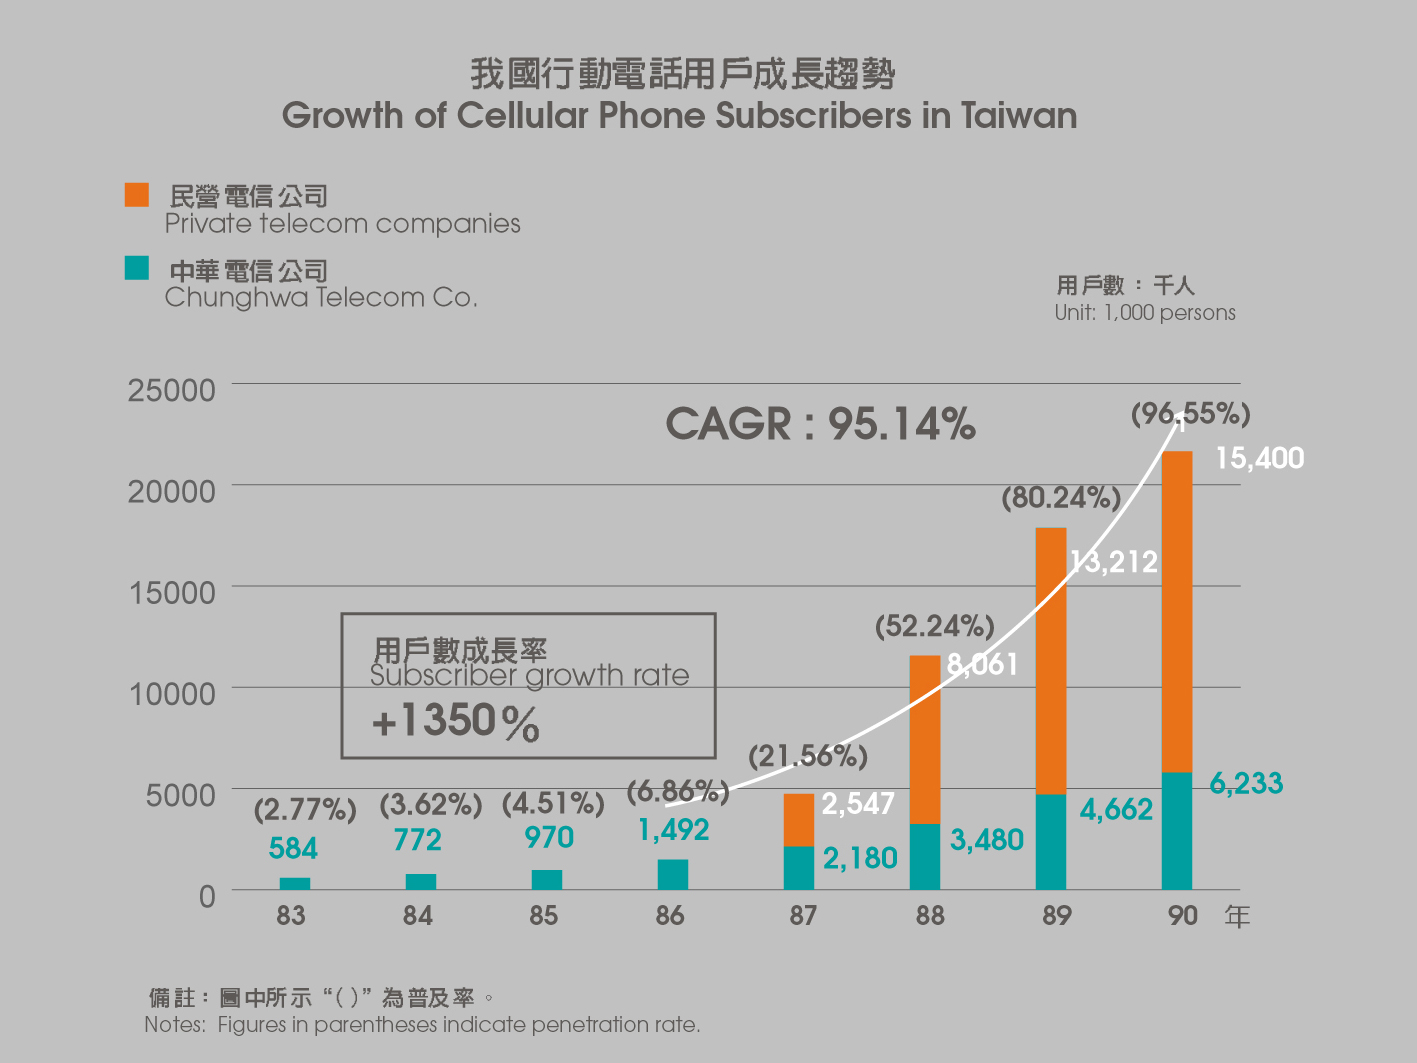 Growth of Cellular Phone Subscribers in Taiwan